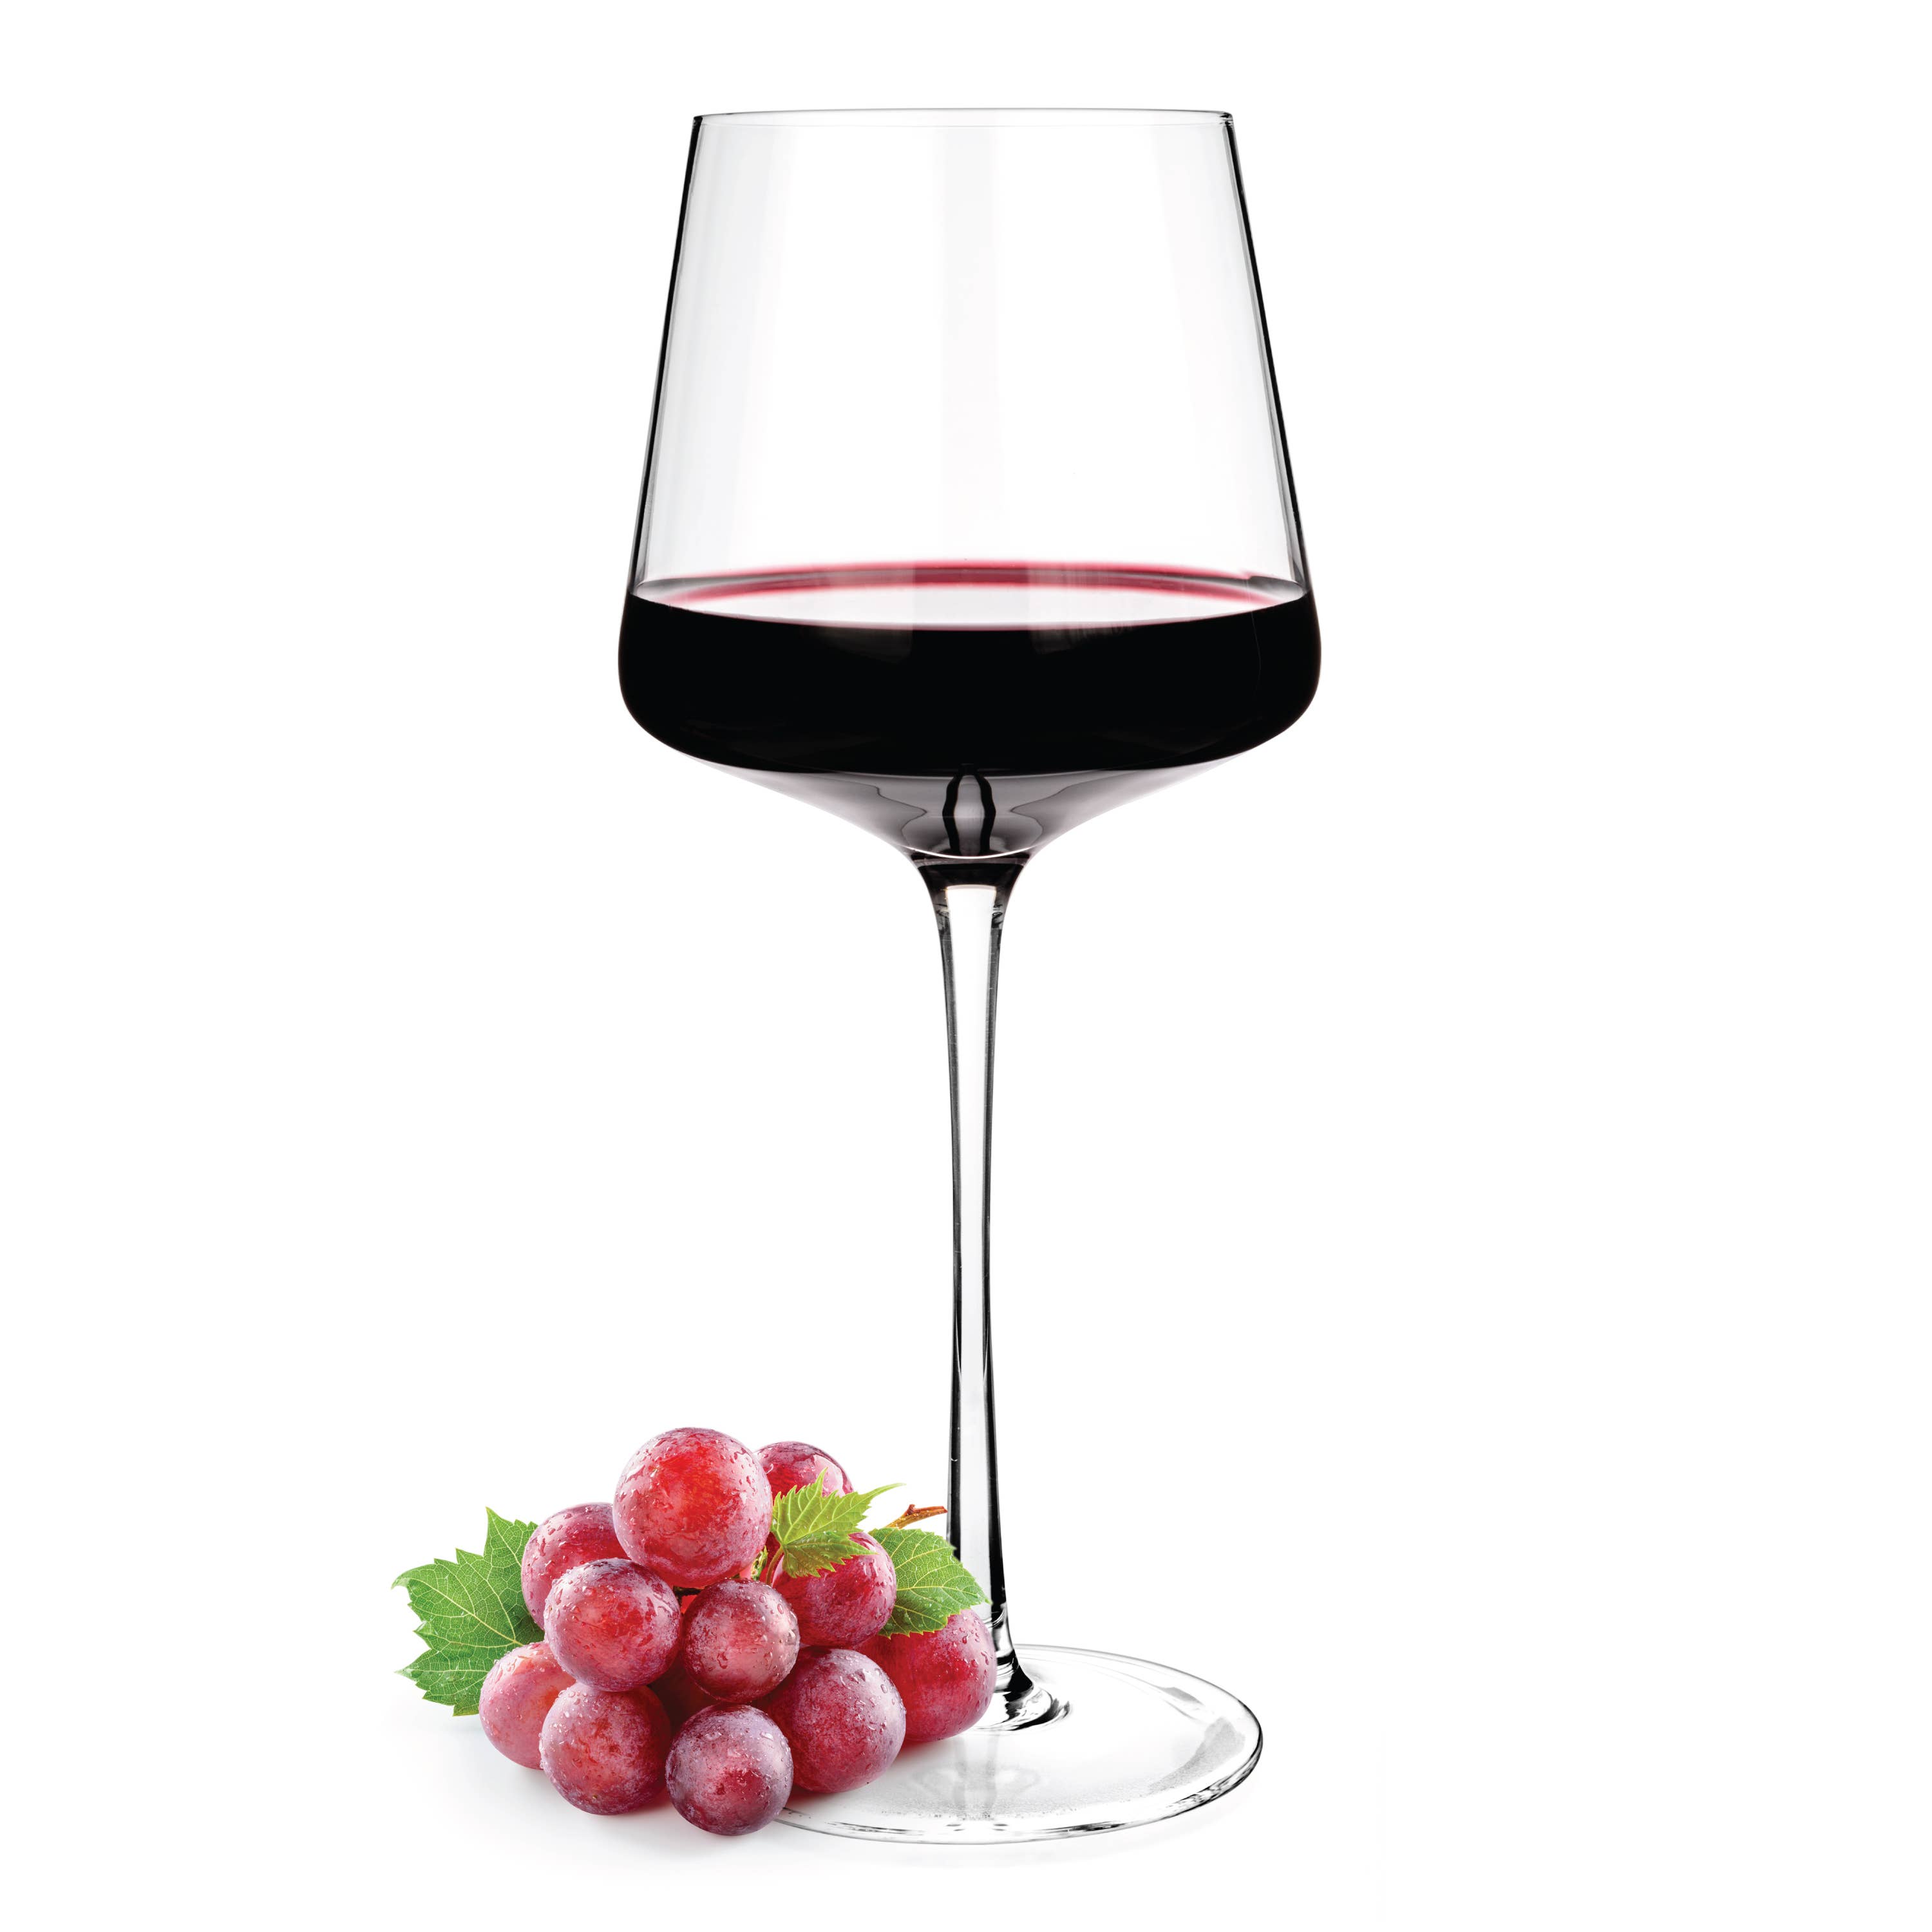 Luxbe - Wine Crystal Glasses Set of 4/6, 20.5 oz Large Tall: Set of 4